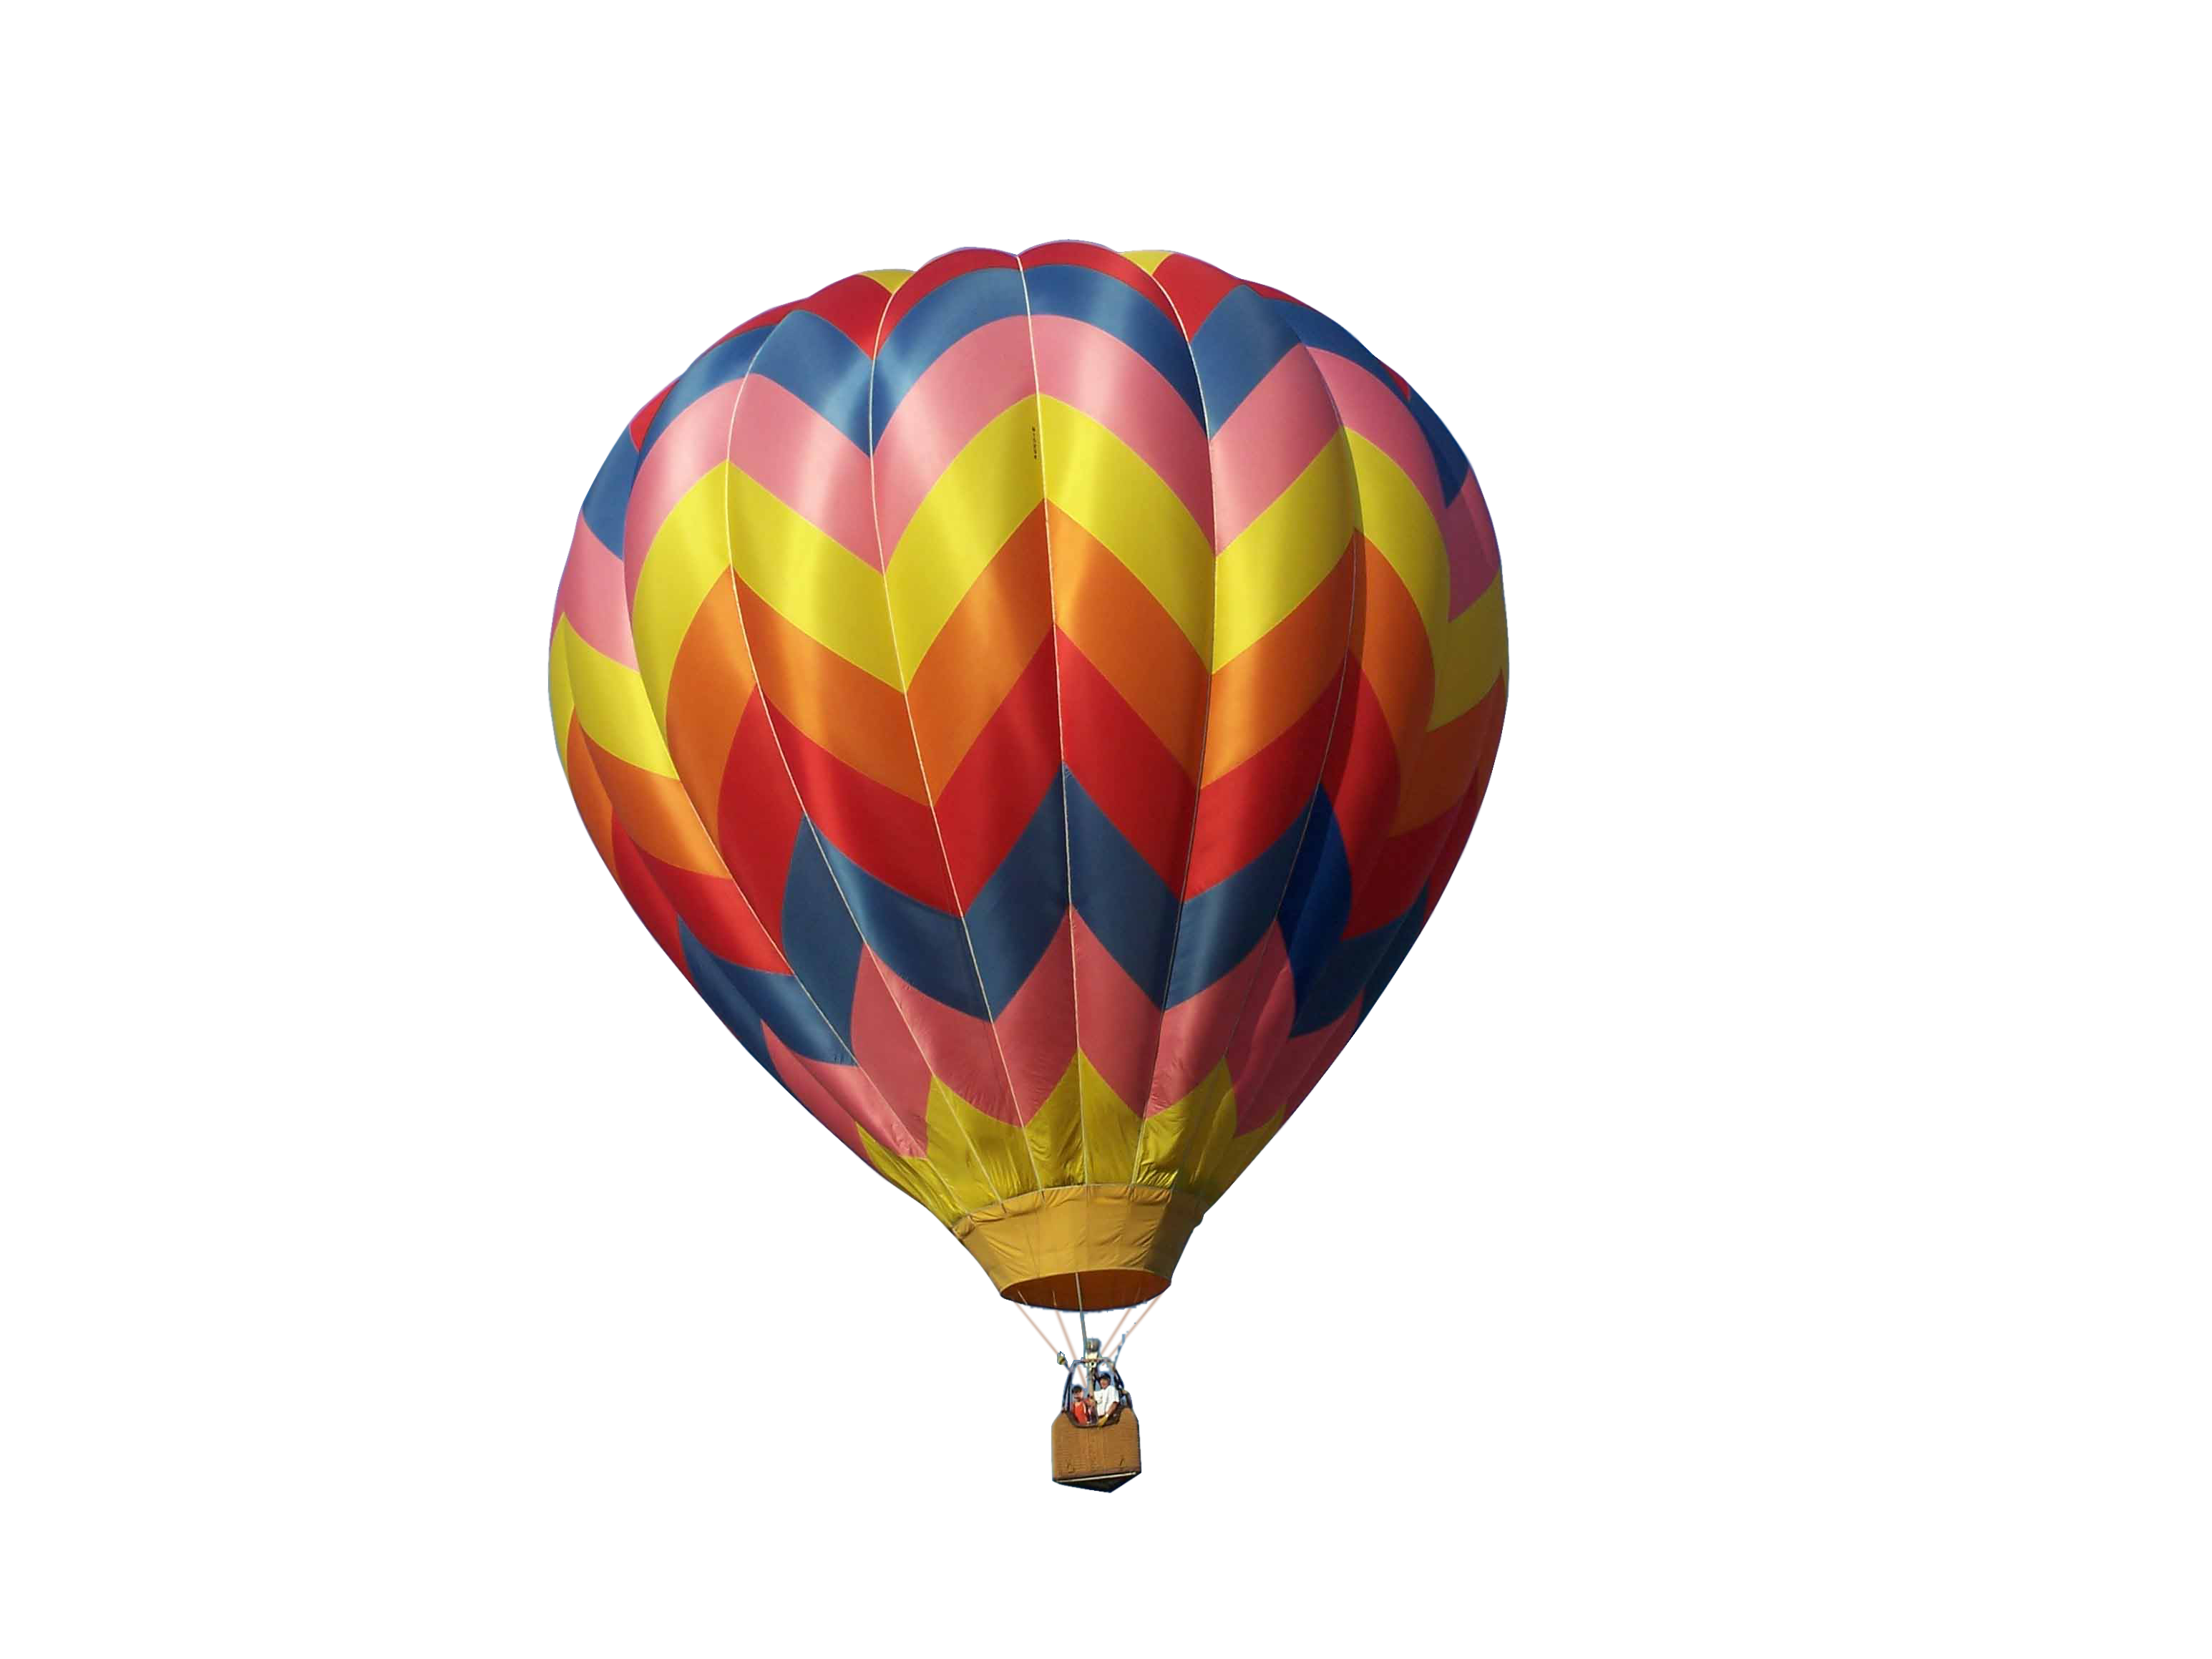 Hot Air Balloon PNG HD and HQ Image pngteam.com